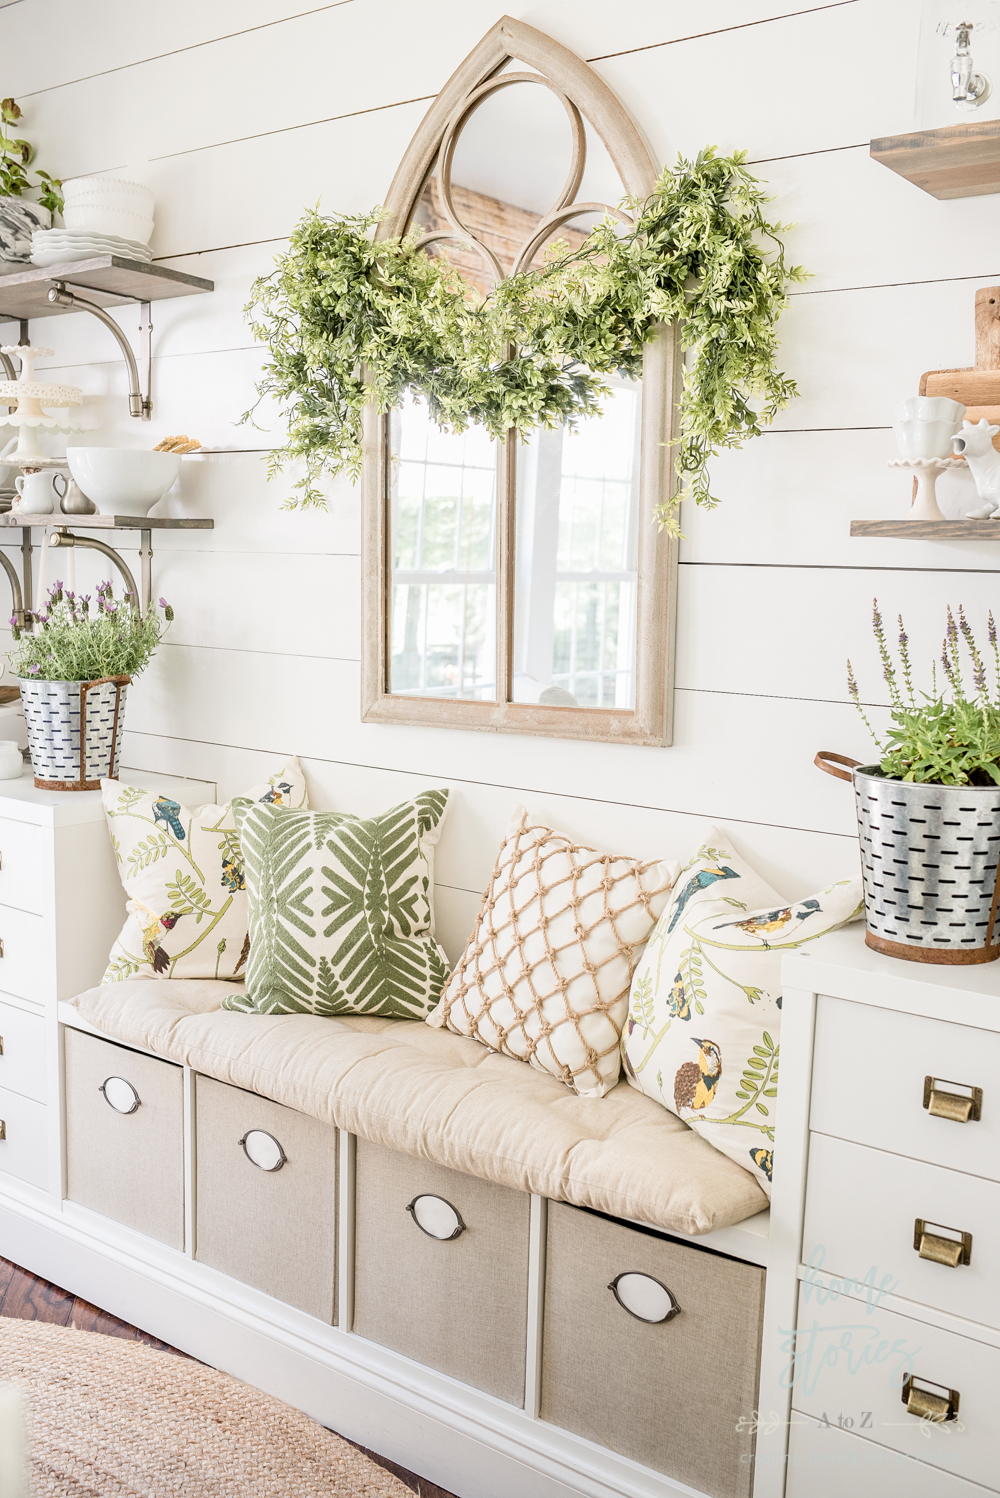 Summer Decorating Ideas Simple To Bring Fun Into Your Home Decor Stories A Z